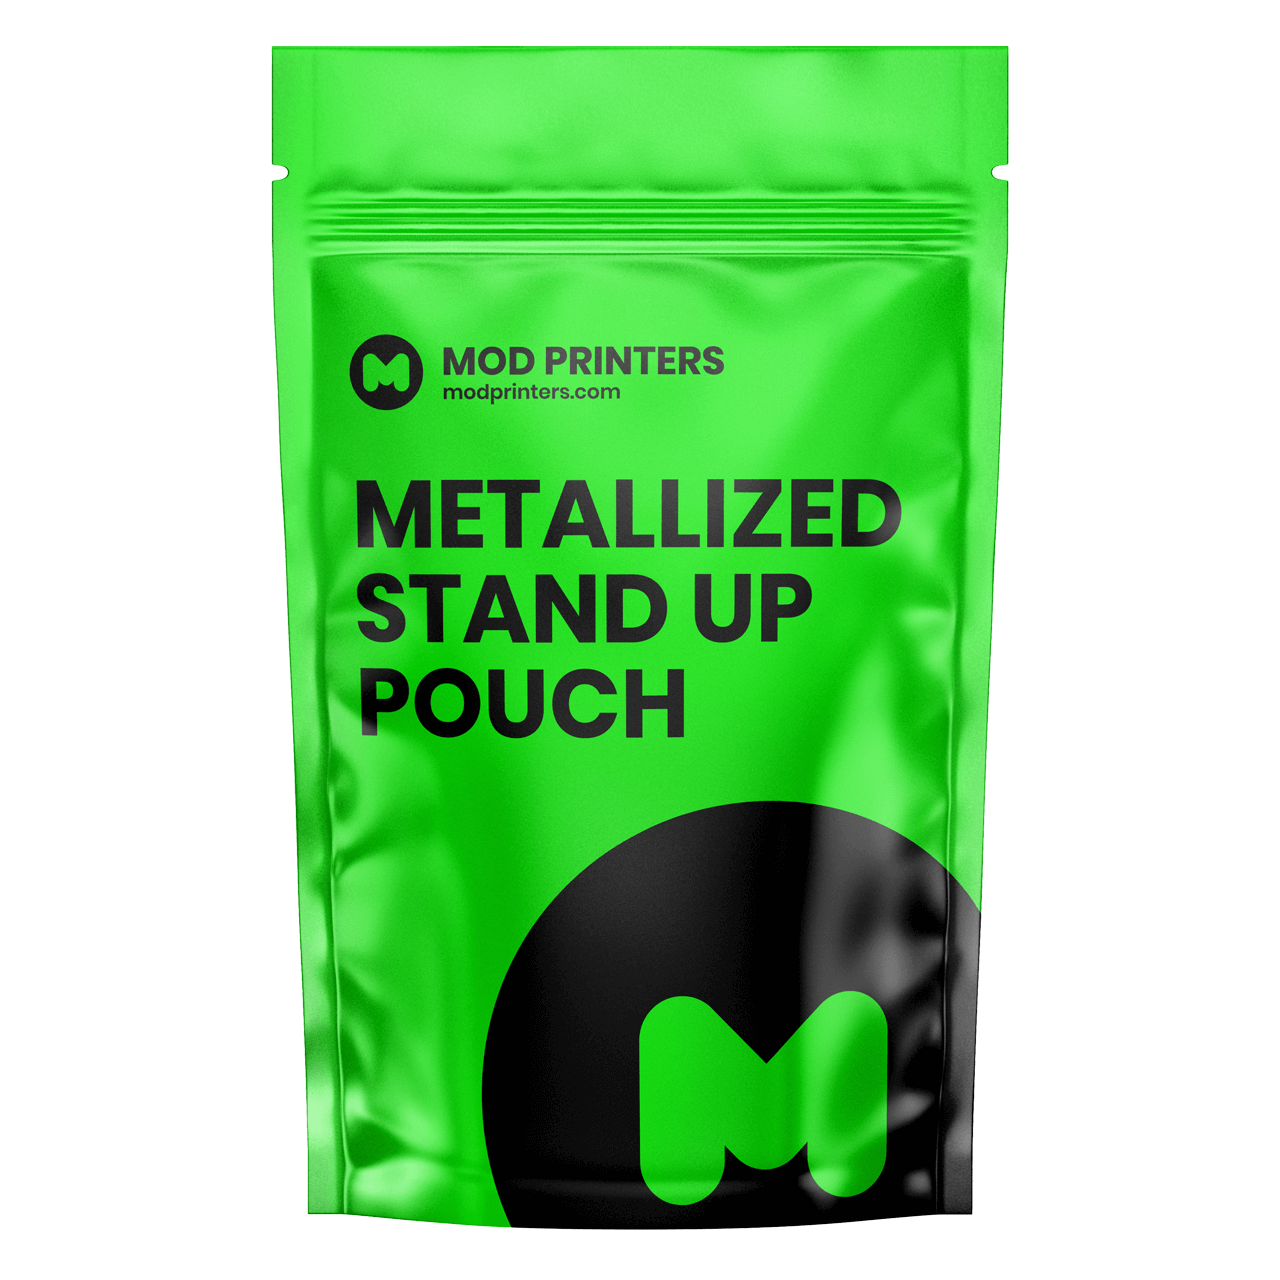 Stand-up pouches - fixed formats